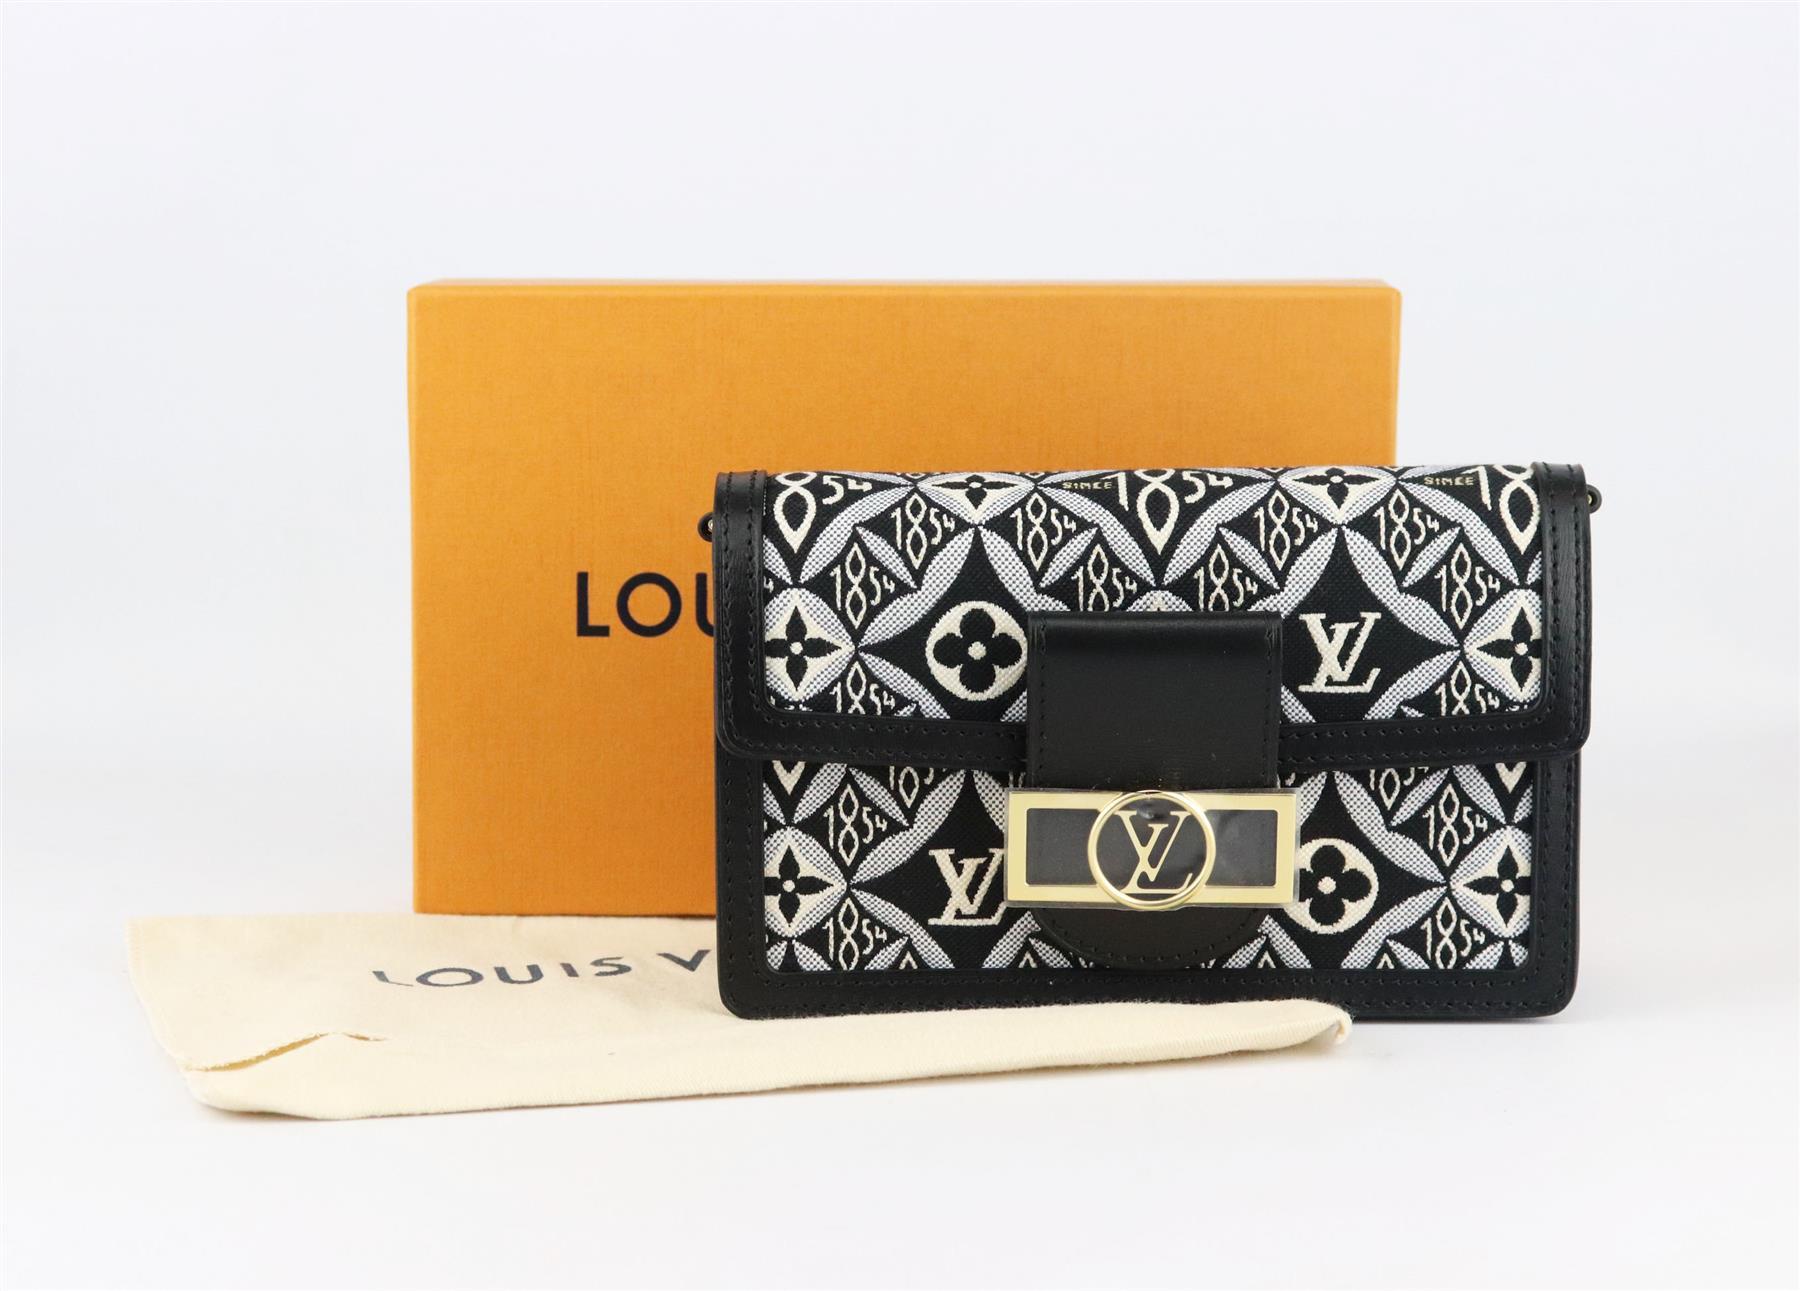 Louis Vuitton ‘Dauphine’ bag has the brand’s signature ‘Since 1854’ canvas textile fabric on a wallet on chain with a slim detachable gold-tone chain, so you can carry it as a shoulder bag, made in Italy from black smooth leather trim, it's finished